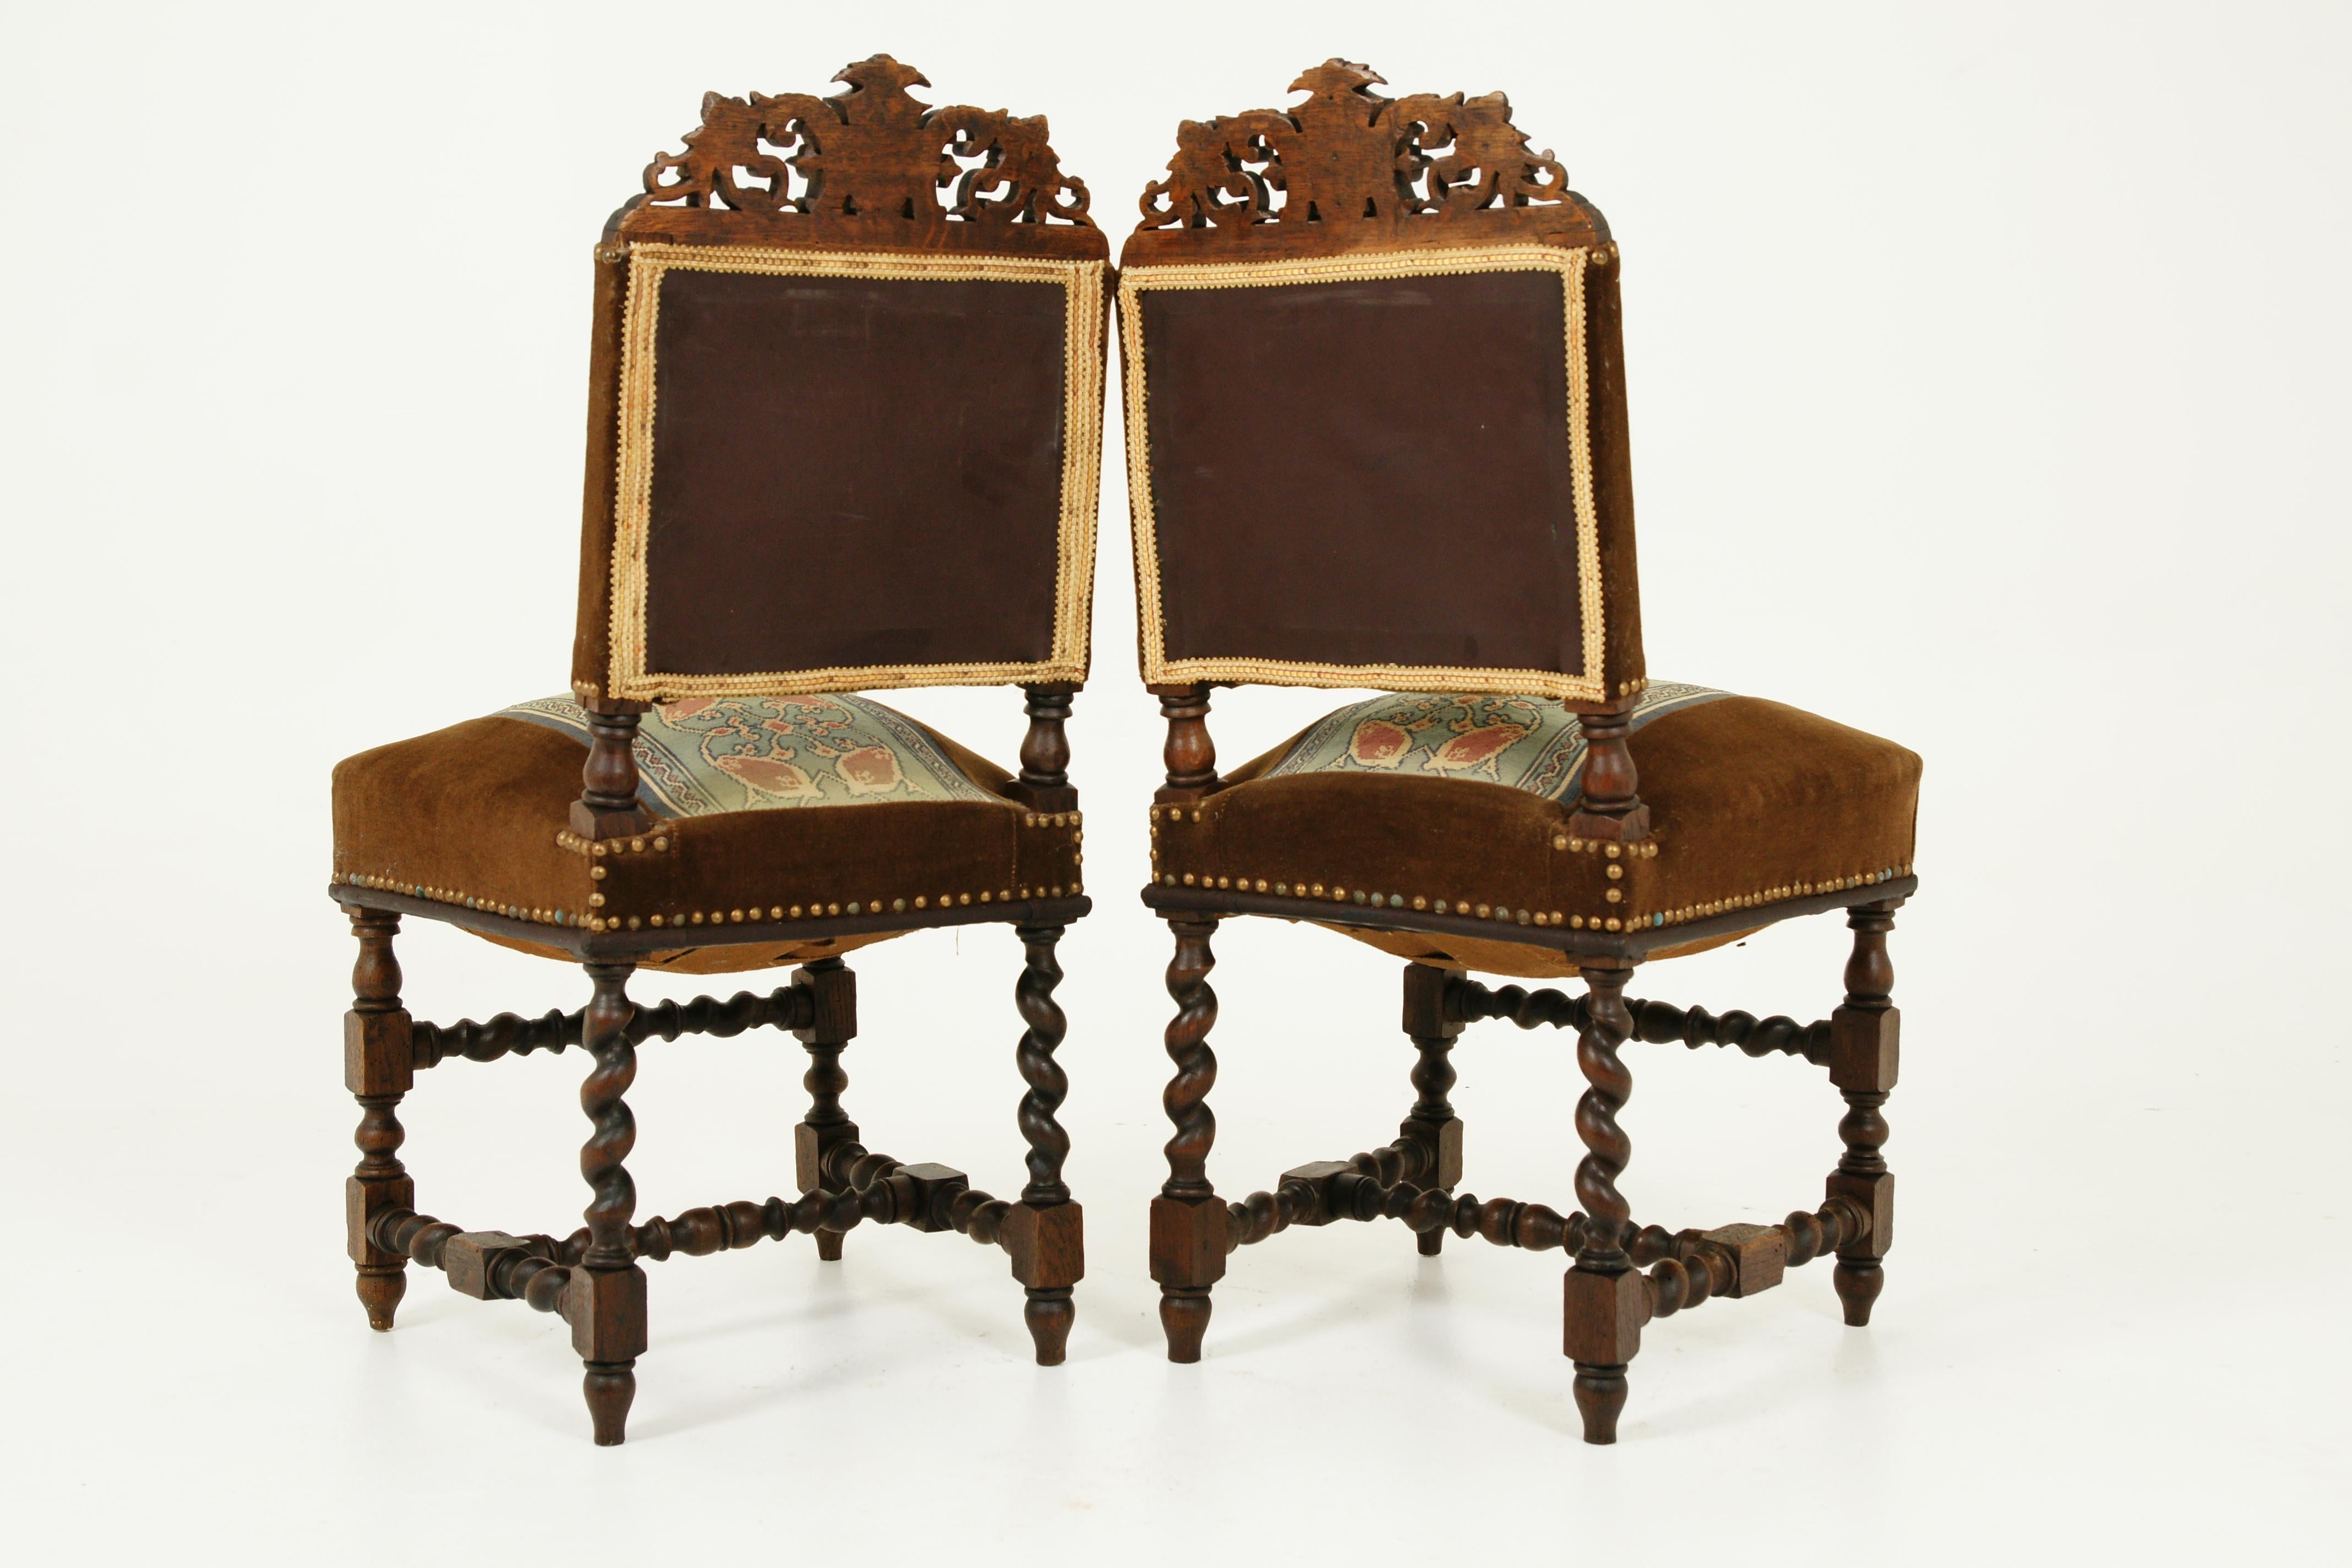 Late 19th Century Antique Pair of Chairs, Carved Oak, Barley Twist, Upholstered, Scotland 1870